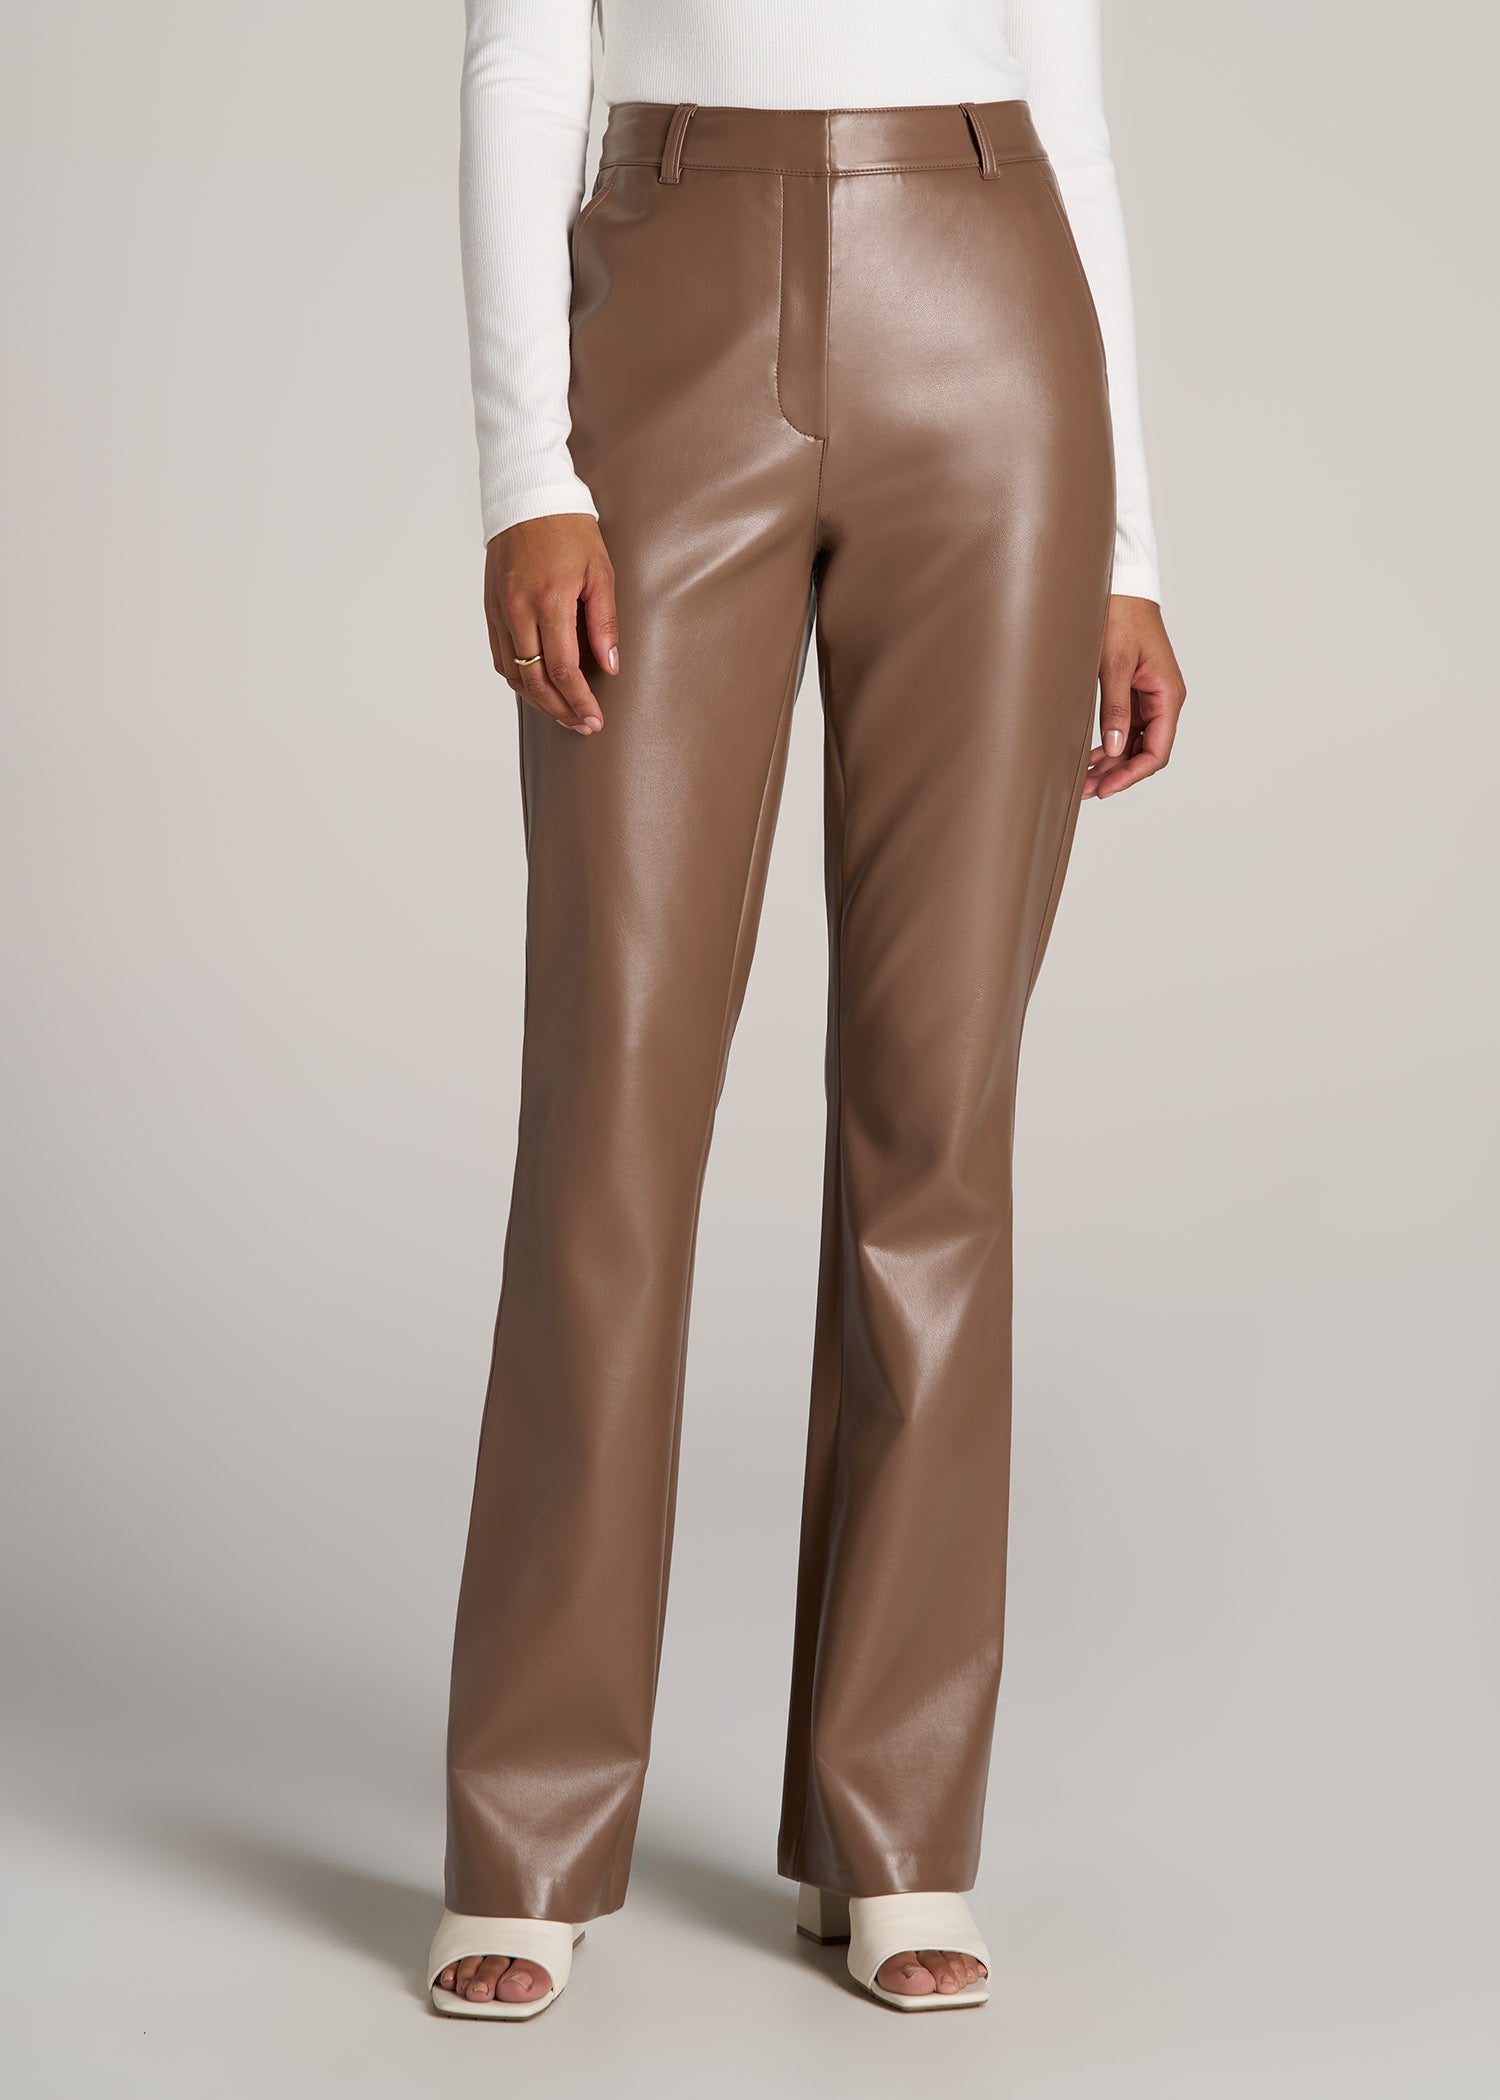 High Waist Pants Lady Leather, Leather Trousers Ladies